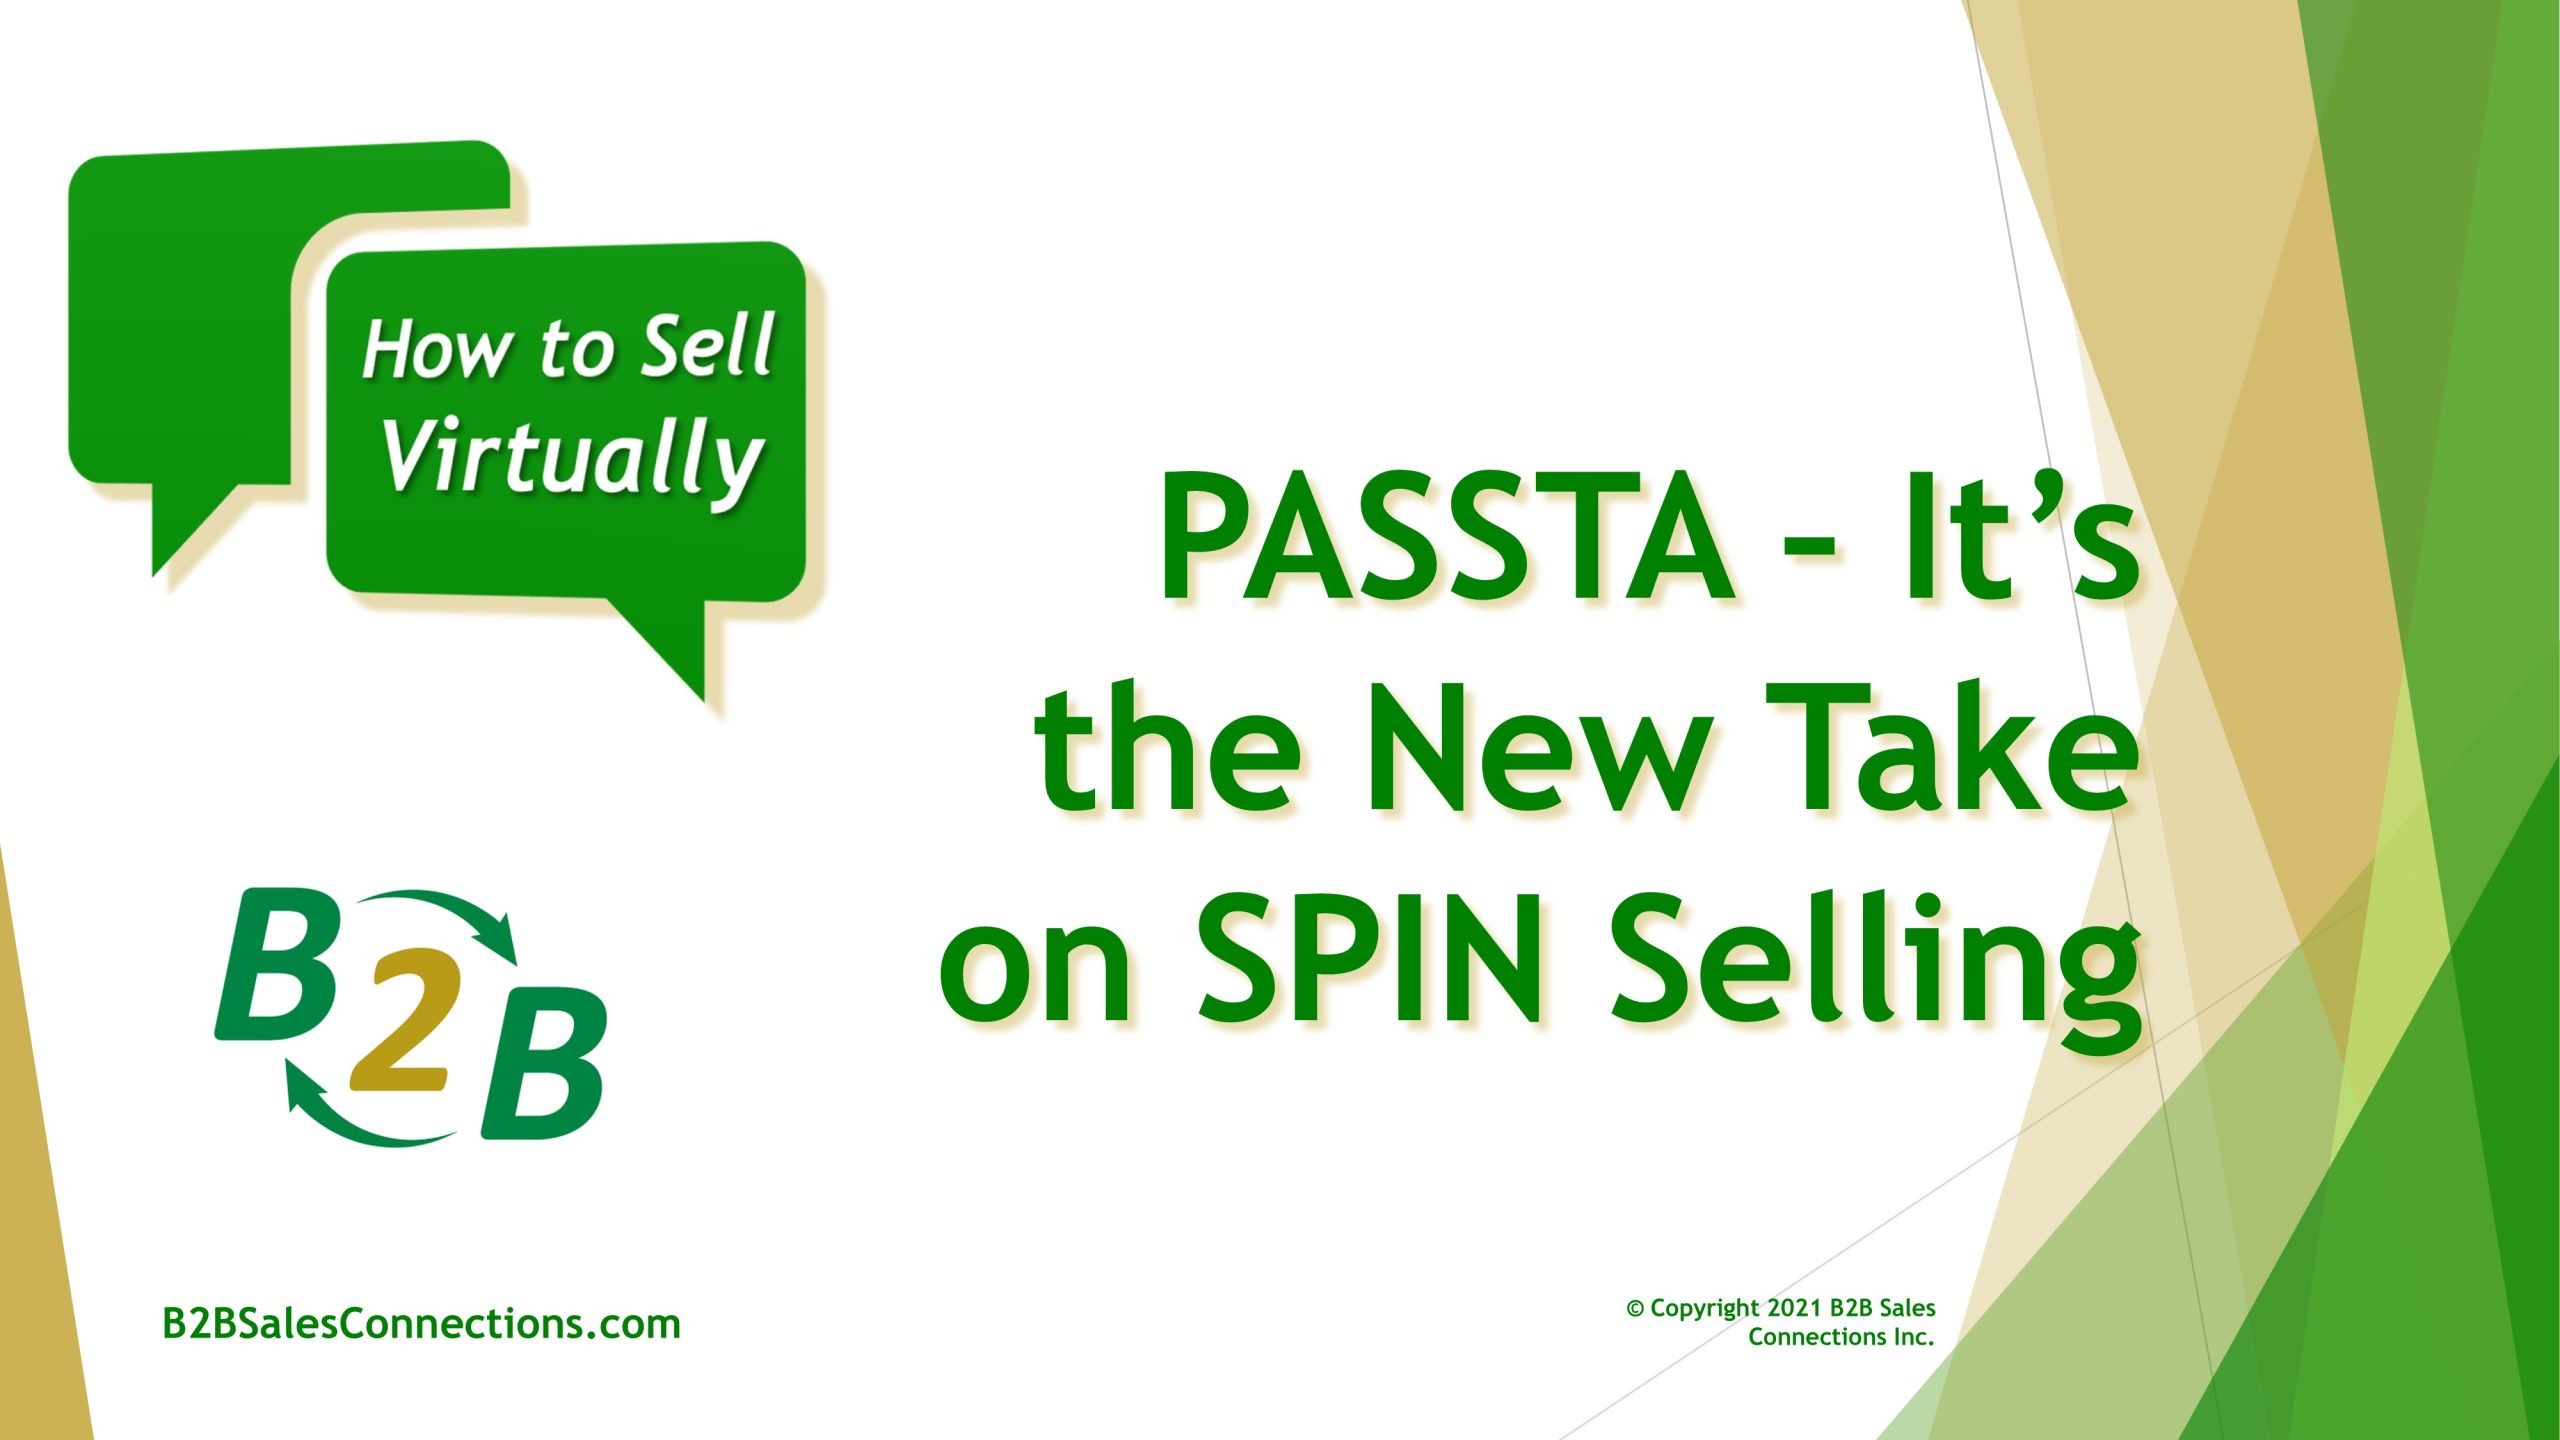 PASSTA Its the New Take on SPIN Selling